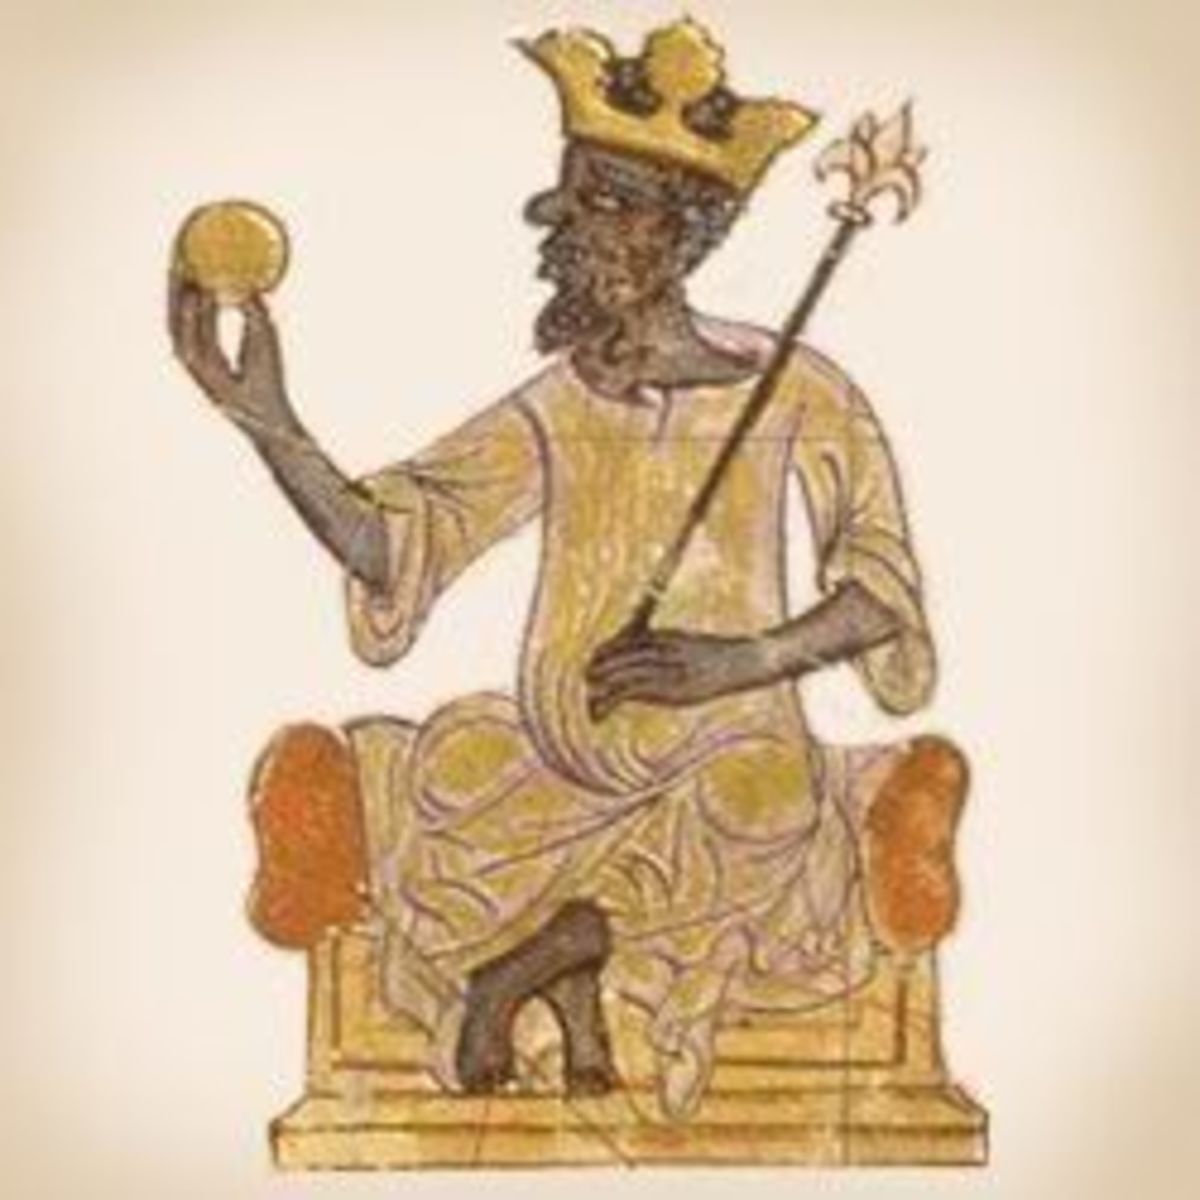 Mansa Masu on his gold throne holding a large gold coin.